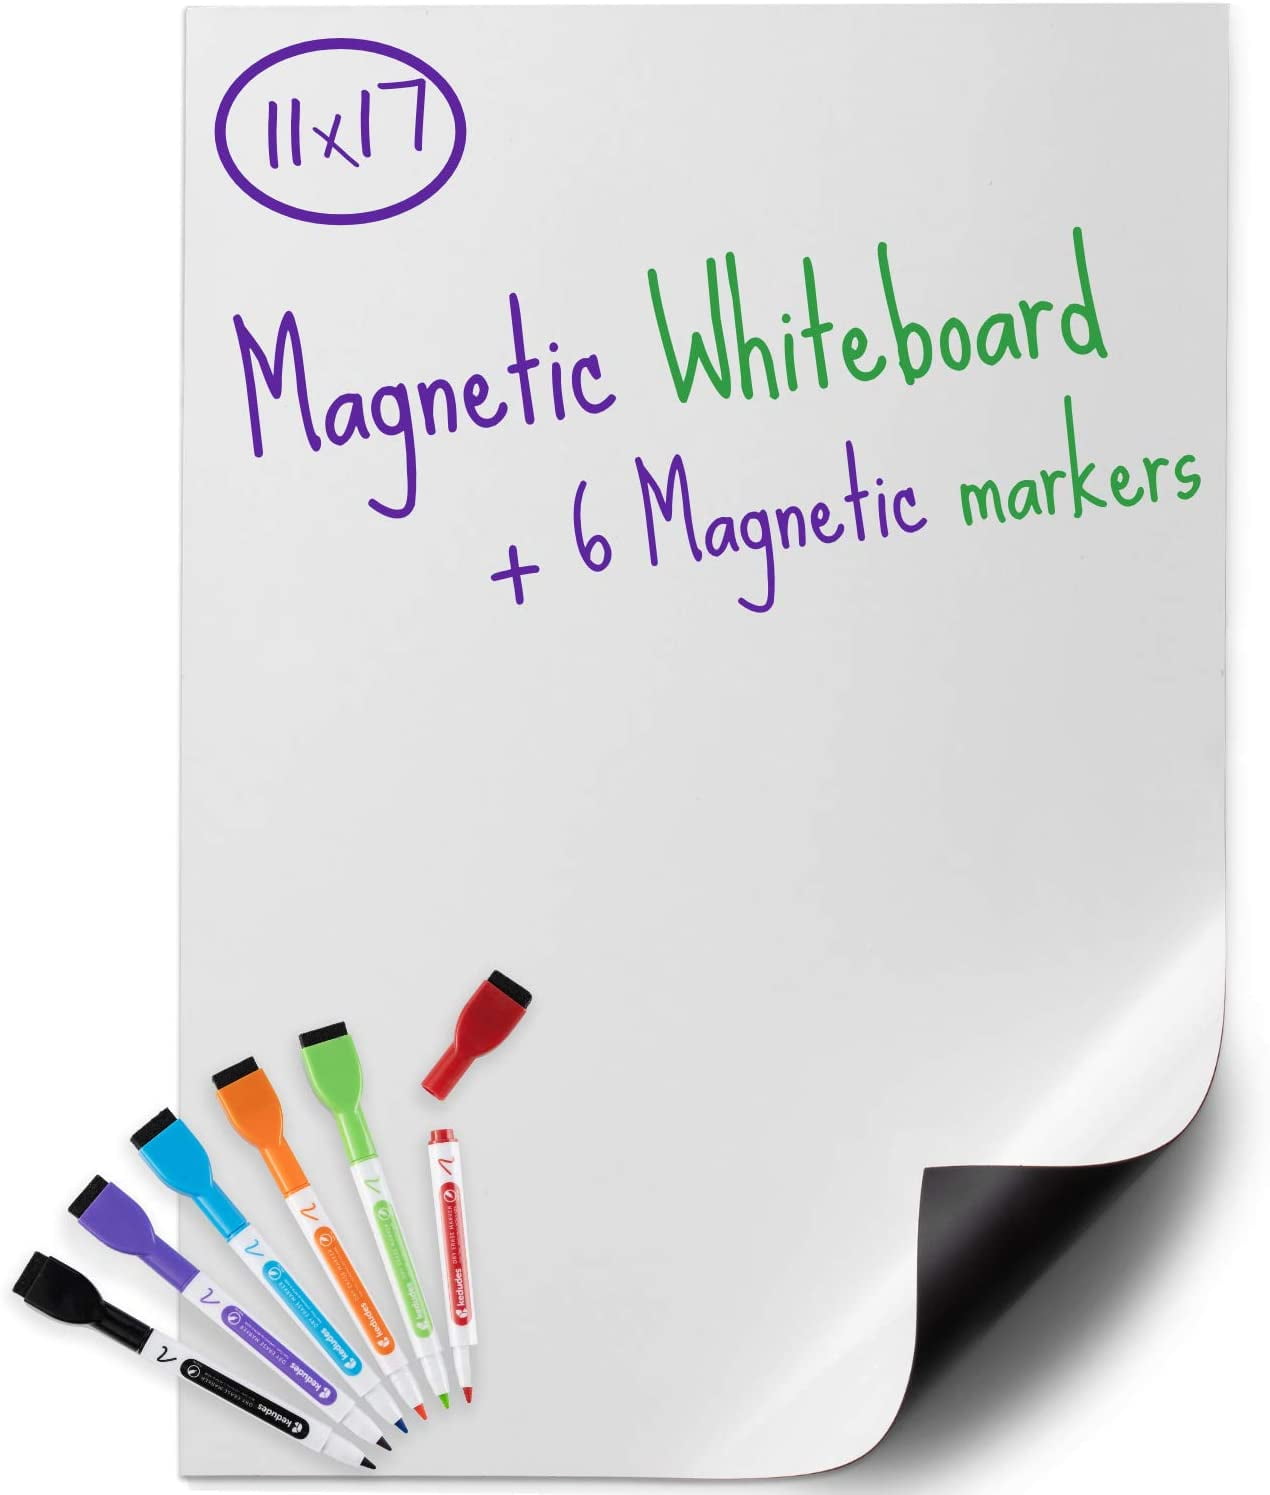 12 Magnetic Buttons 3 Pack Magnetic Dry Erase Whiteboard Sheets for Fridge Refrigerator Includes 2 PCS Large 17 x 13 inch 1 PCS 12 x 10 inch 5 Color Magnetic Markers and 1 Magnetic Eraser 